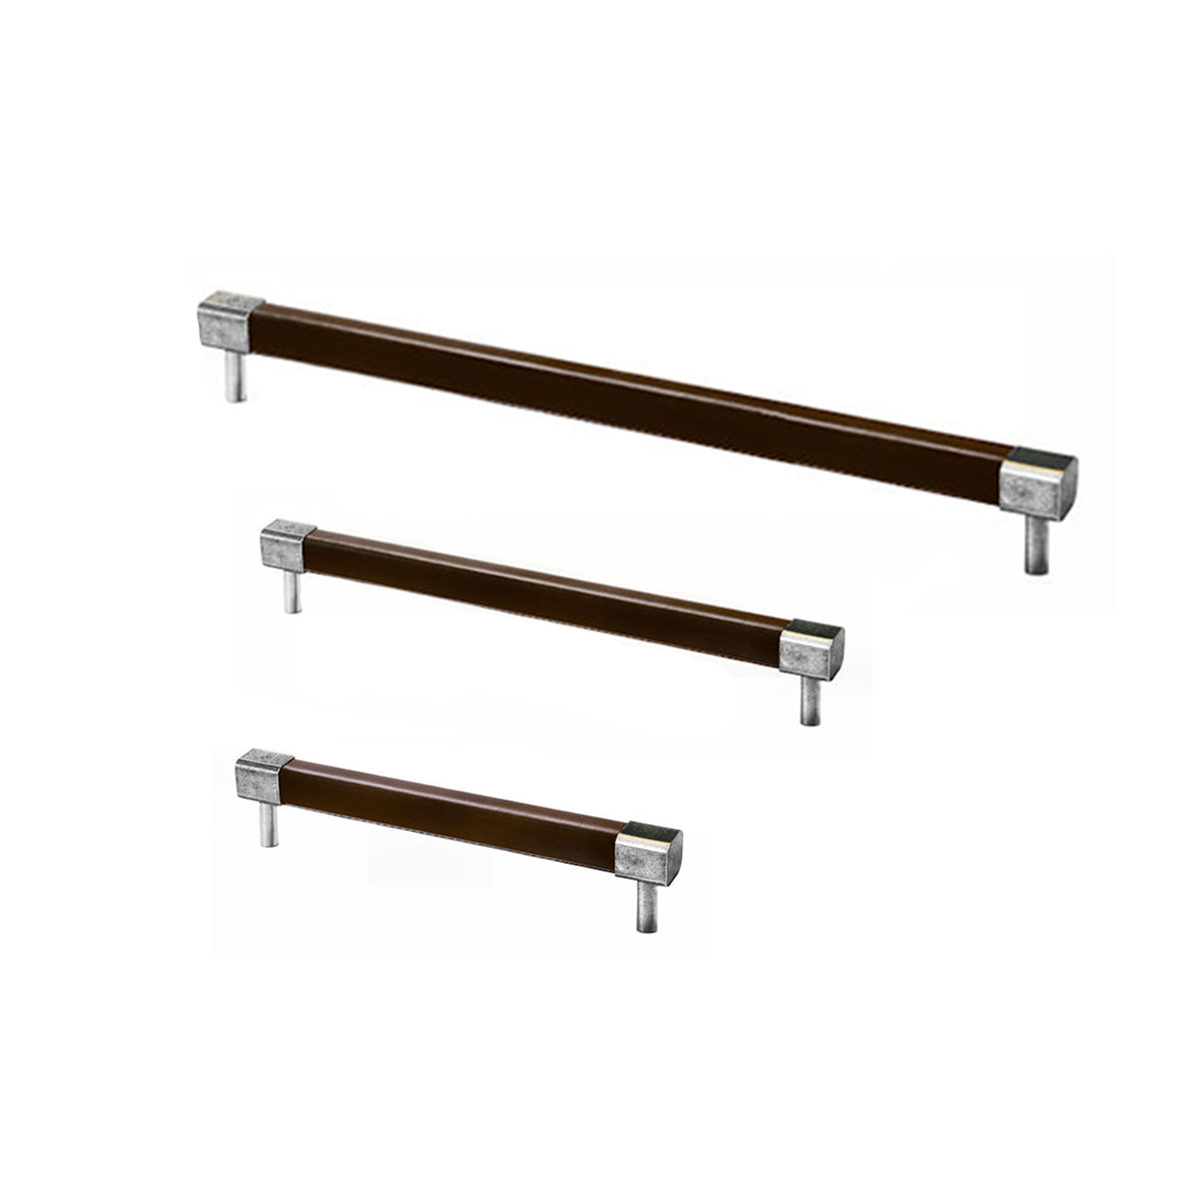 Brown leather kitchen bar handle